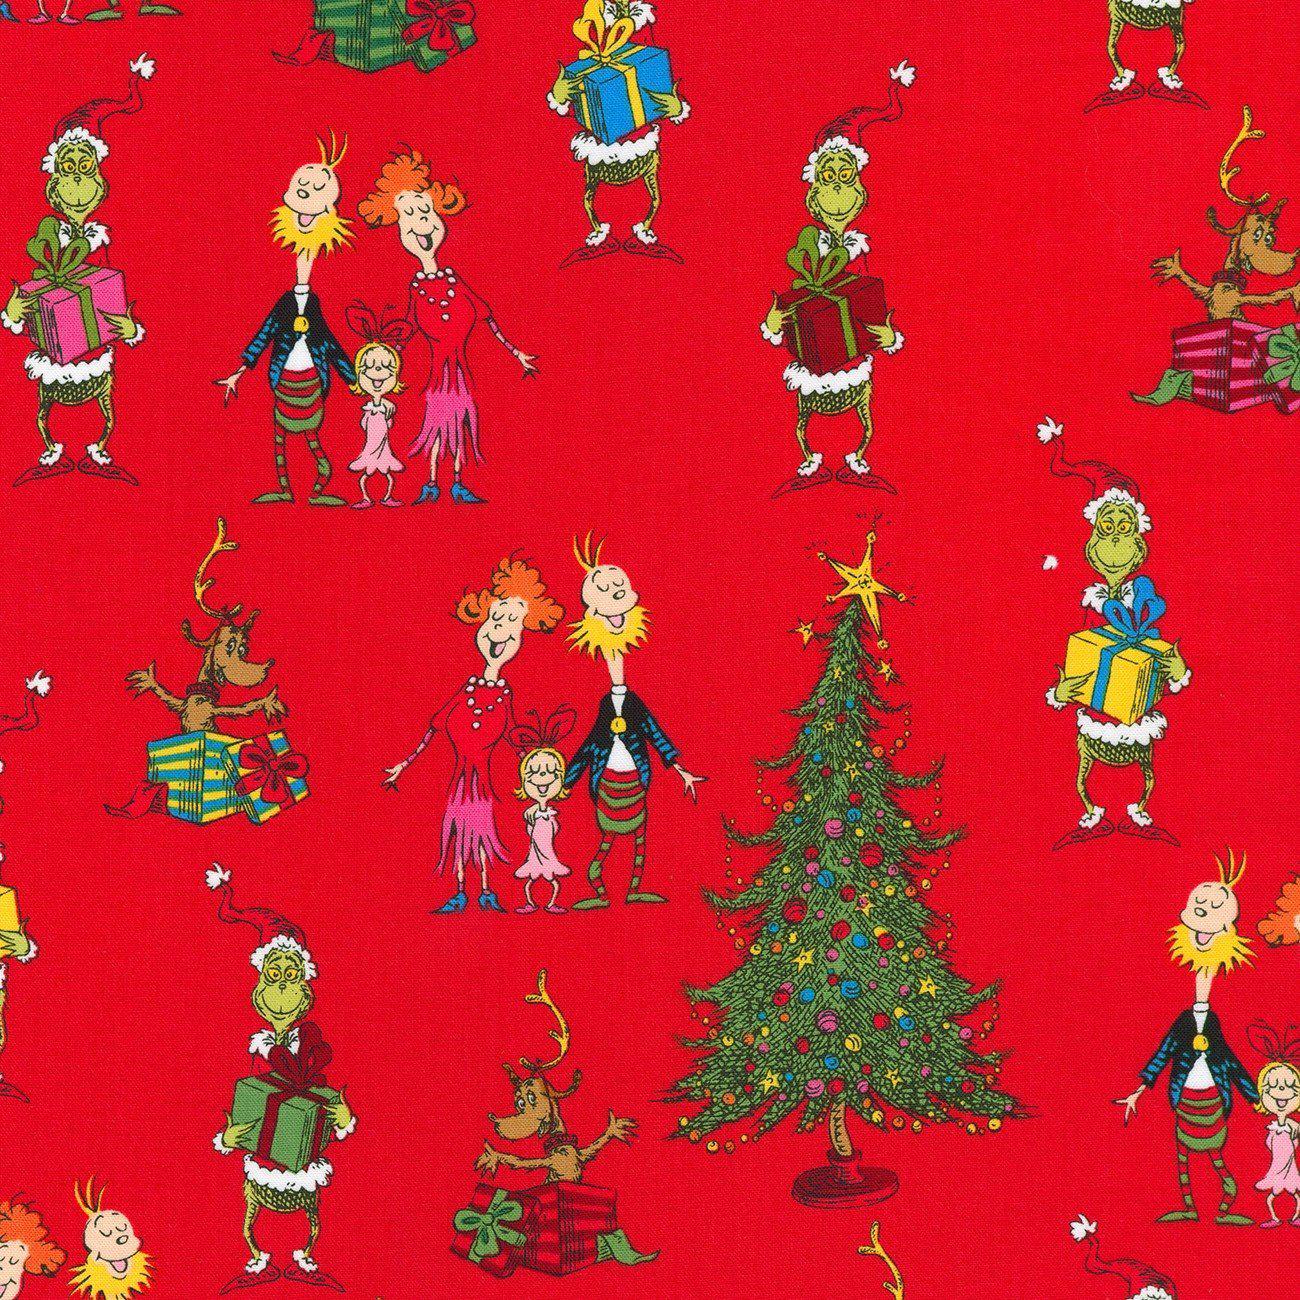 Dr. Seuss How the Grinch Stole Christmas Red Fabric